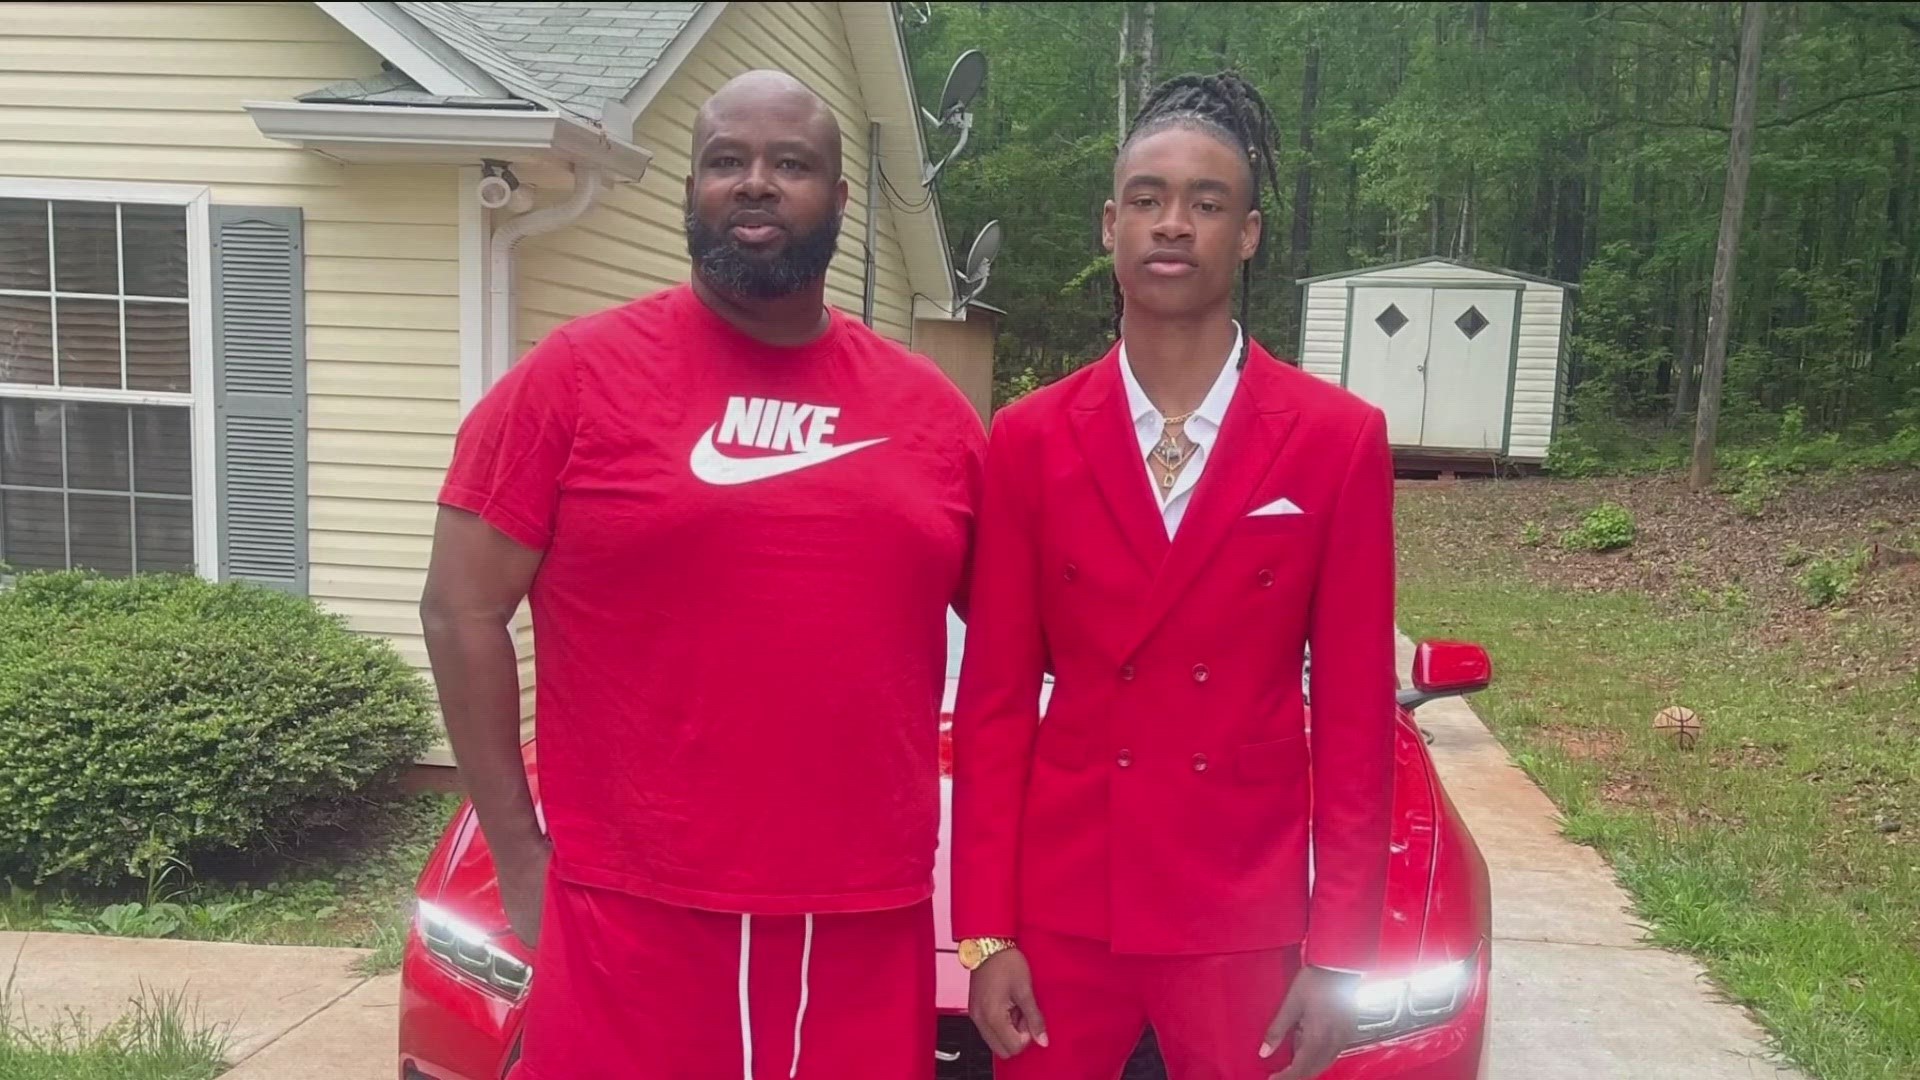 The family of a Manchester High School student is trying to learn how to navigate life without him just days before what would have been his 17th birthday.